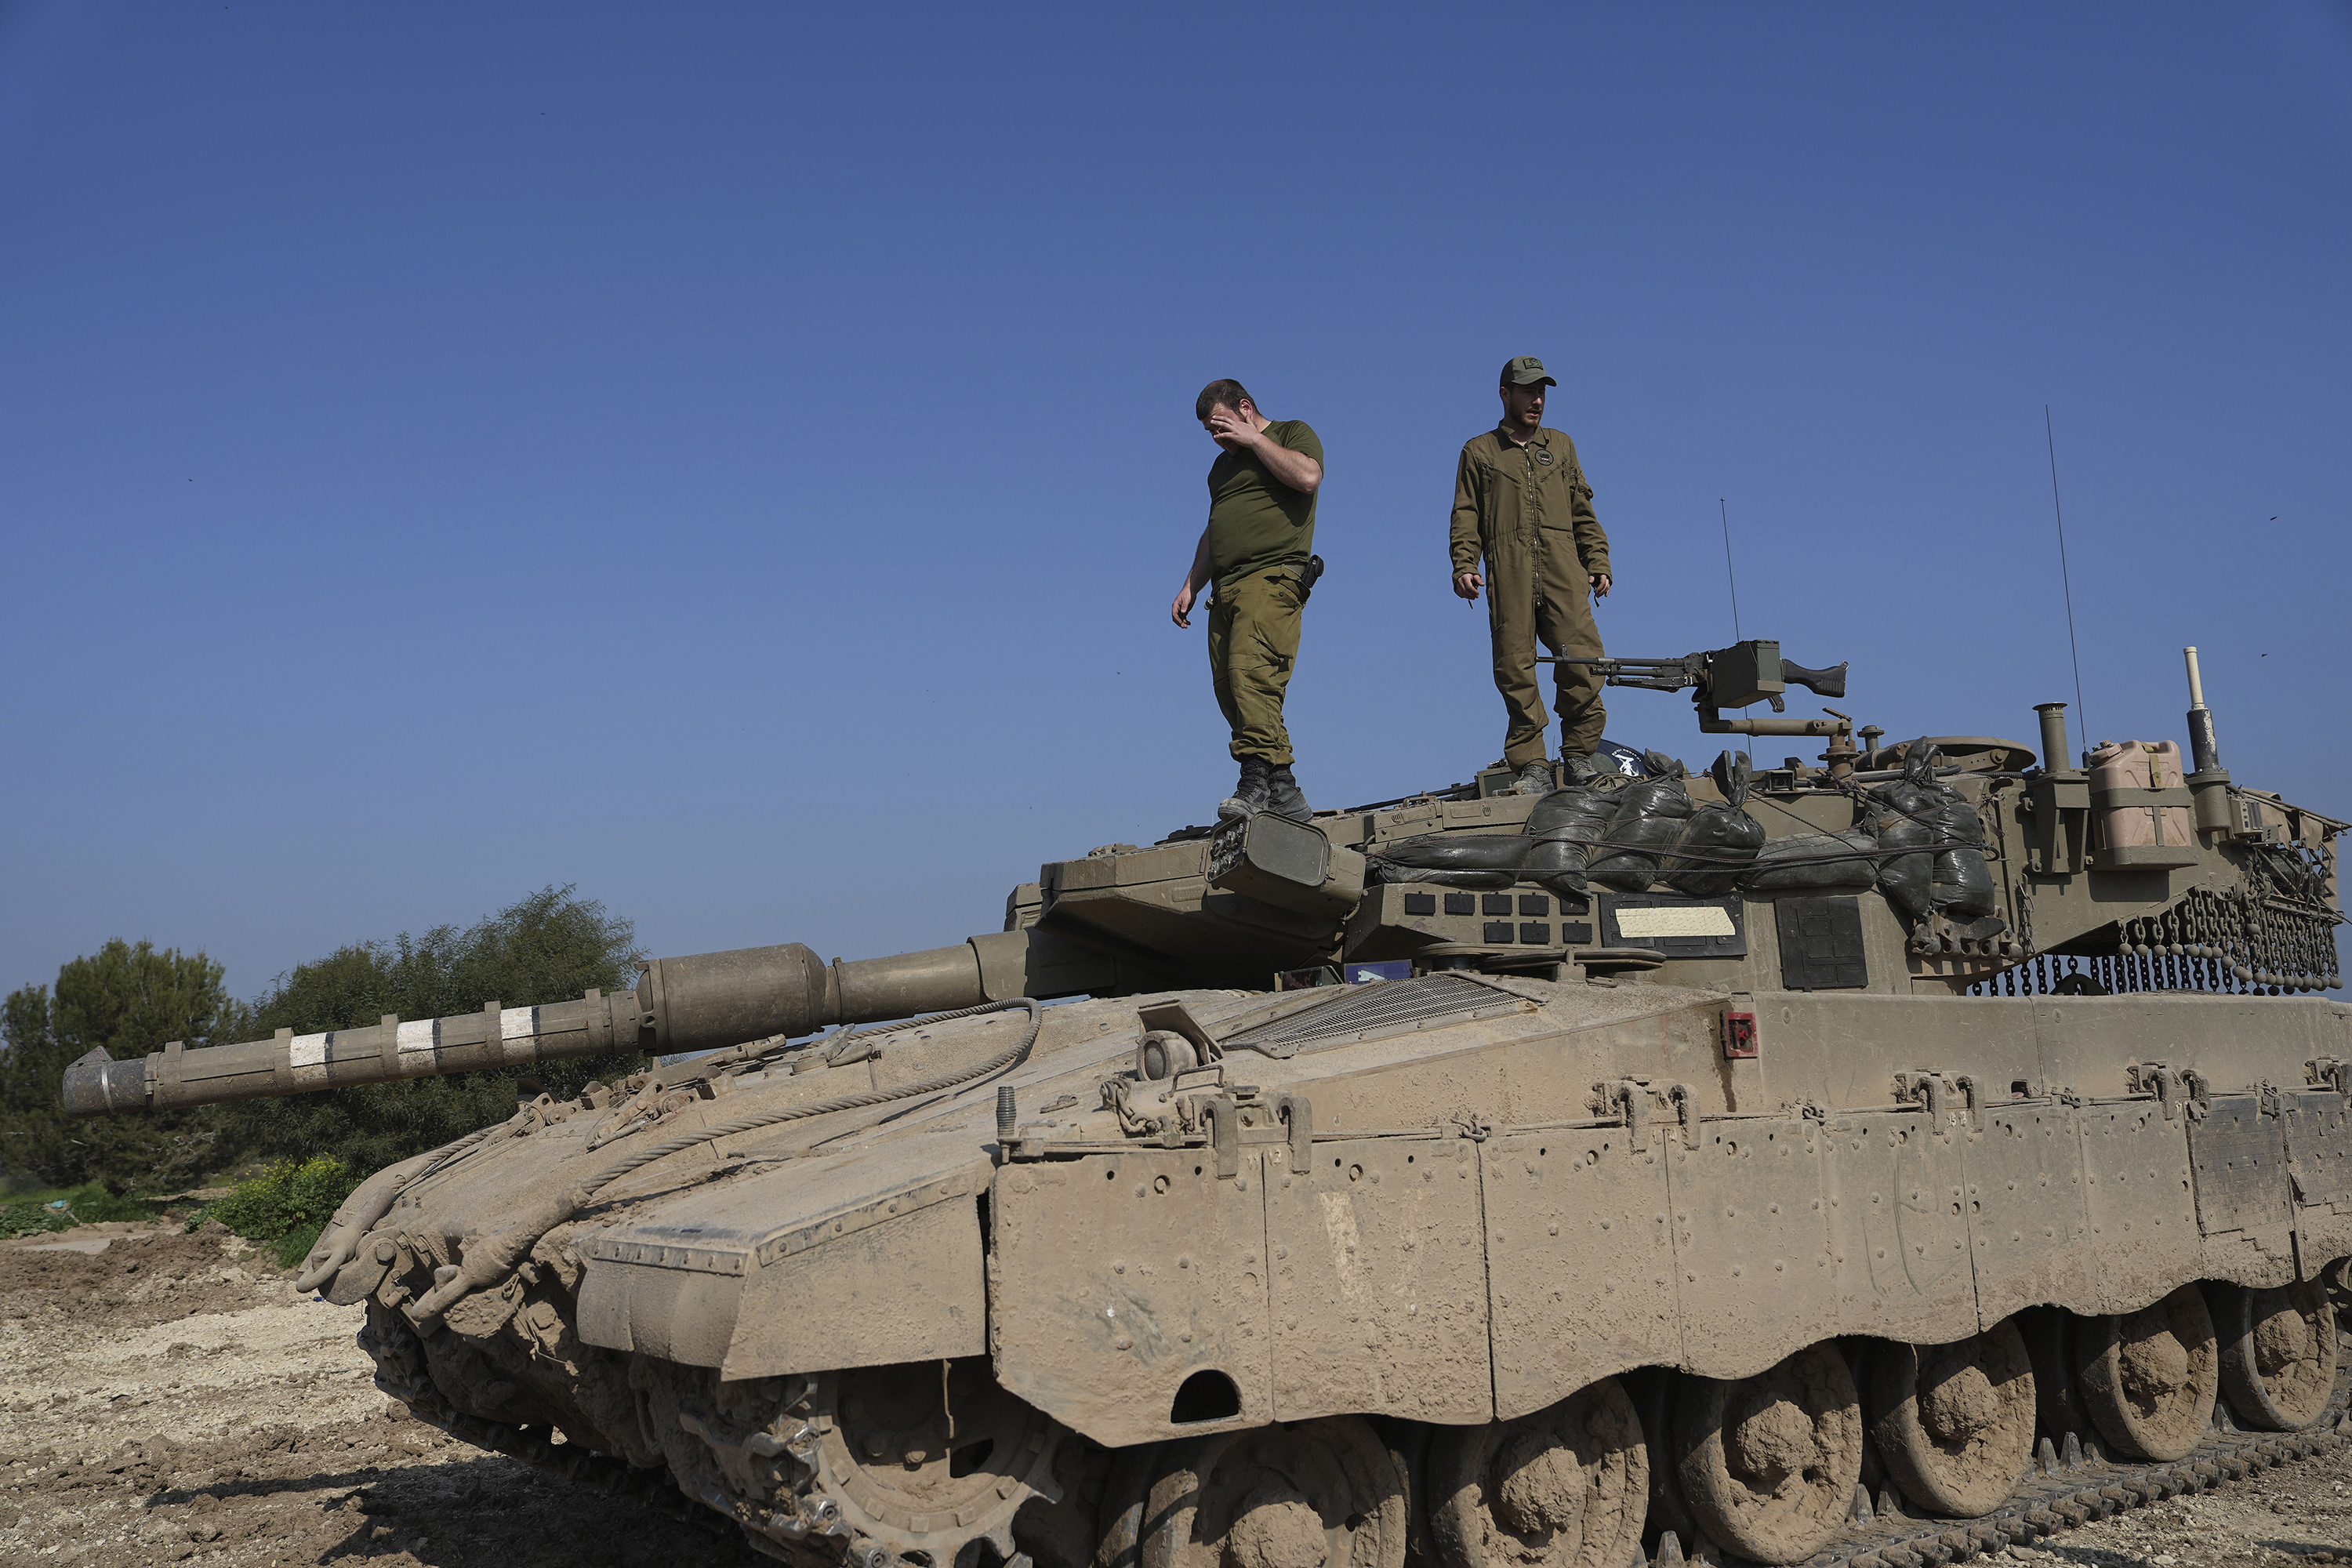 Israeli soldiers stand on their tank in a staging area near the Israel-Gaza border.